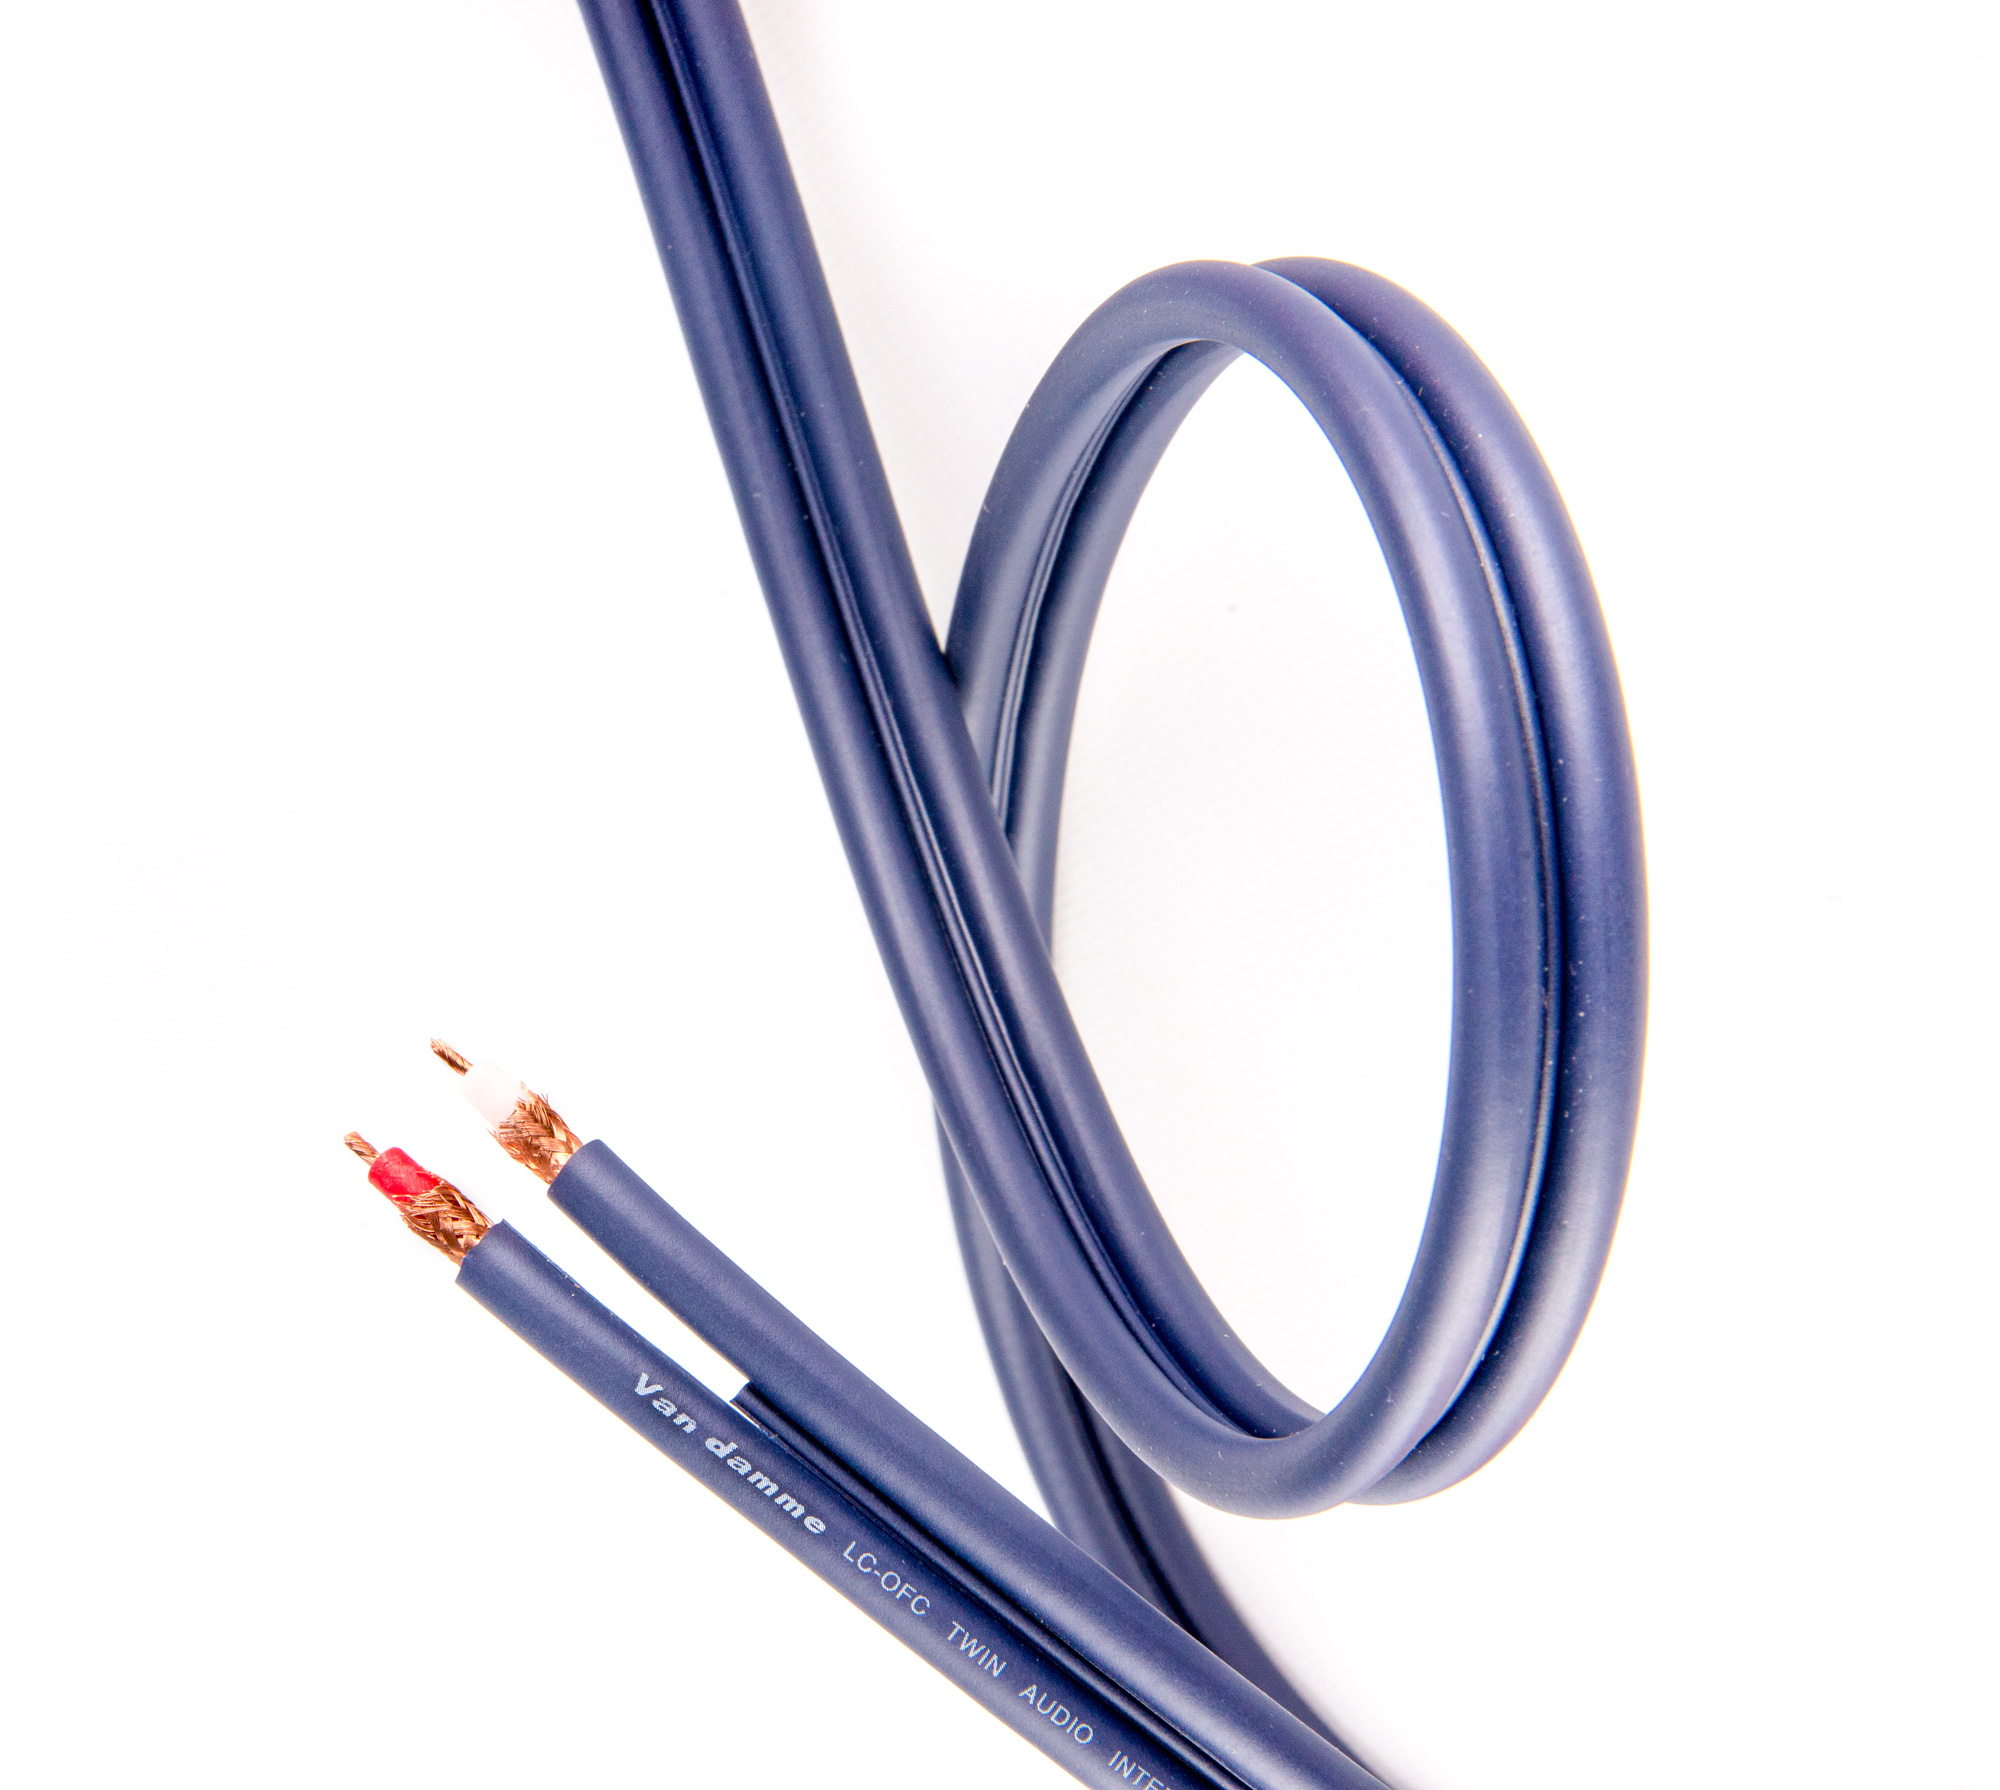 VAN DAMME UP-LCOFC HI-FI TWIN INTERCONNECT CABLE